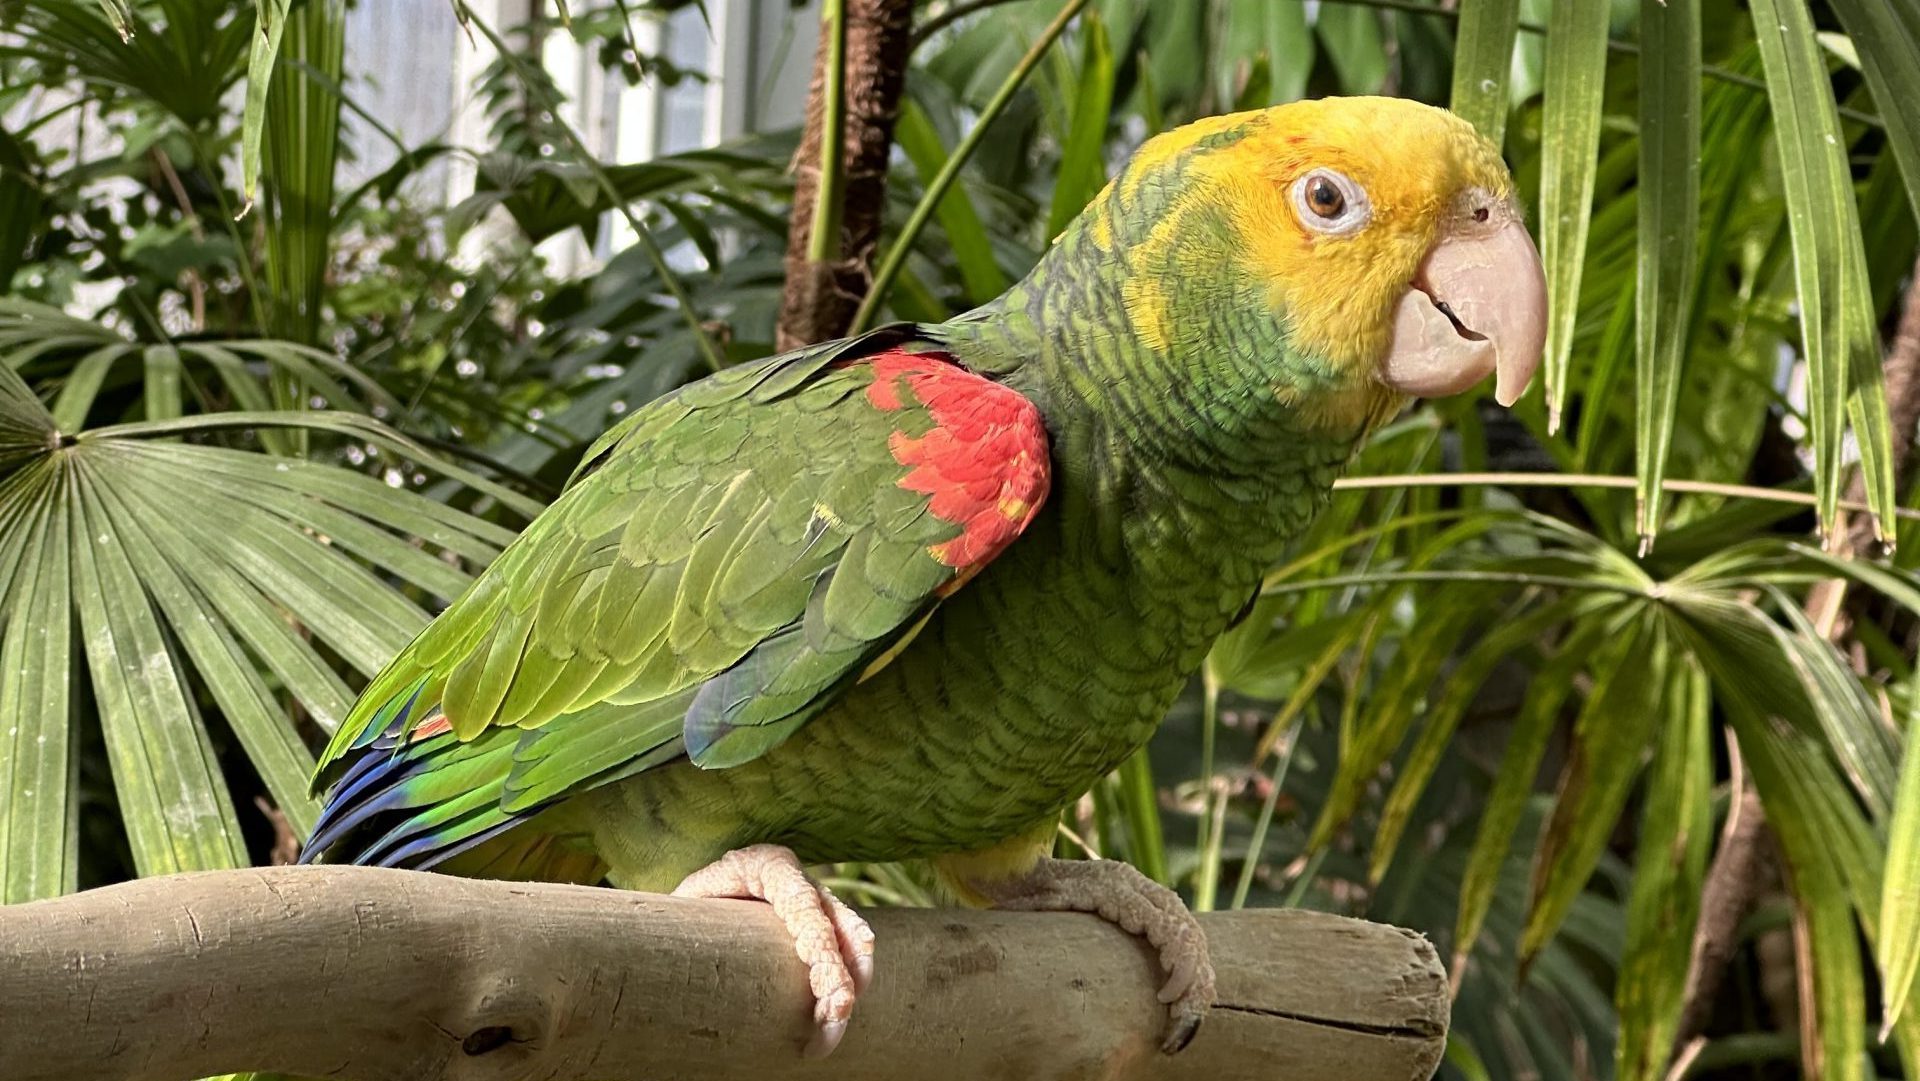 The Oak Park Conservatory Says Goodbye to its Beloved Parrot George